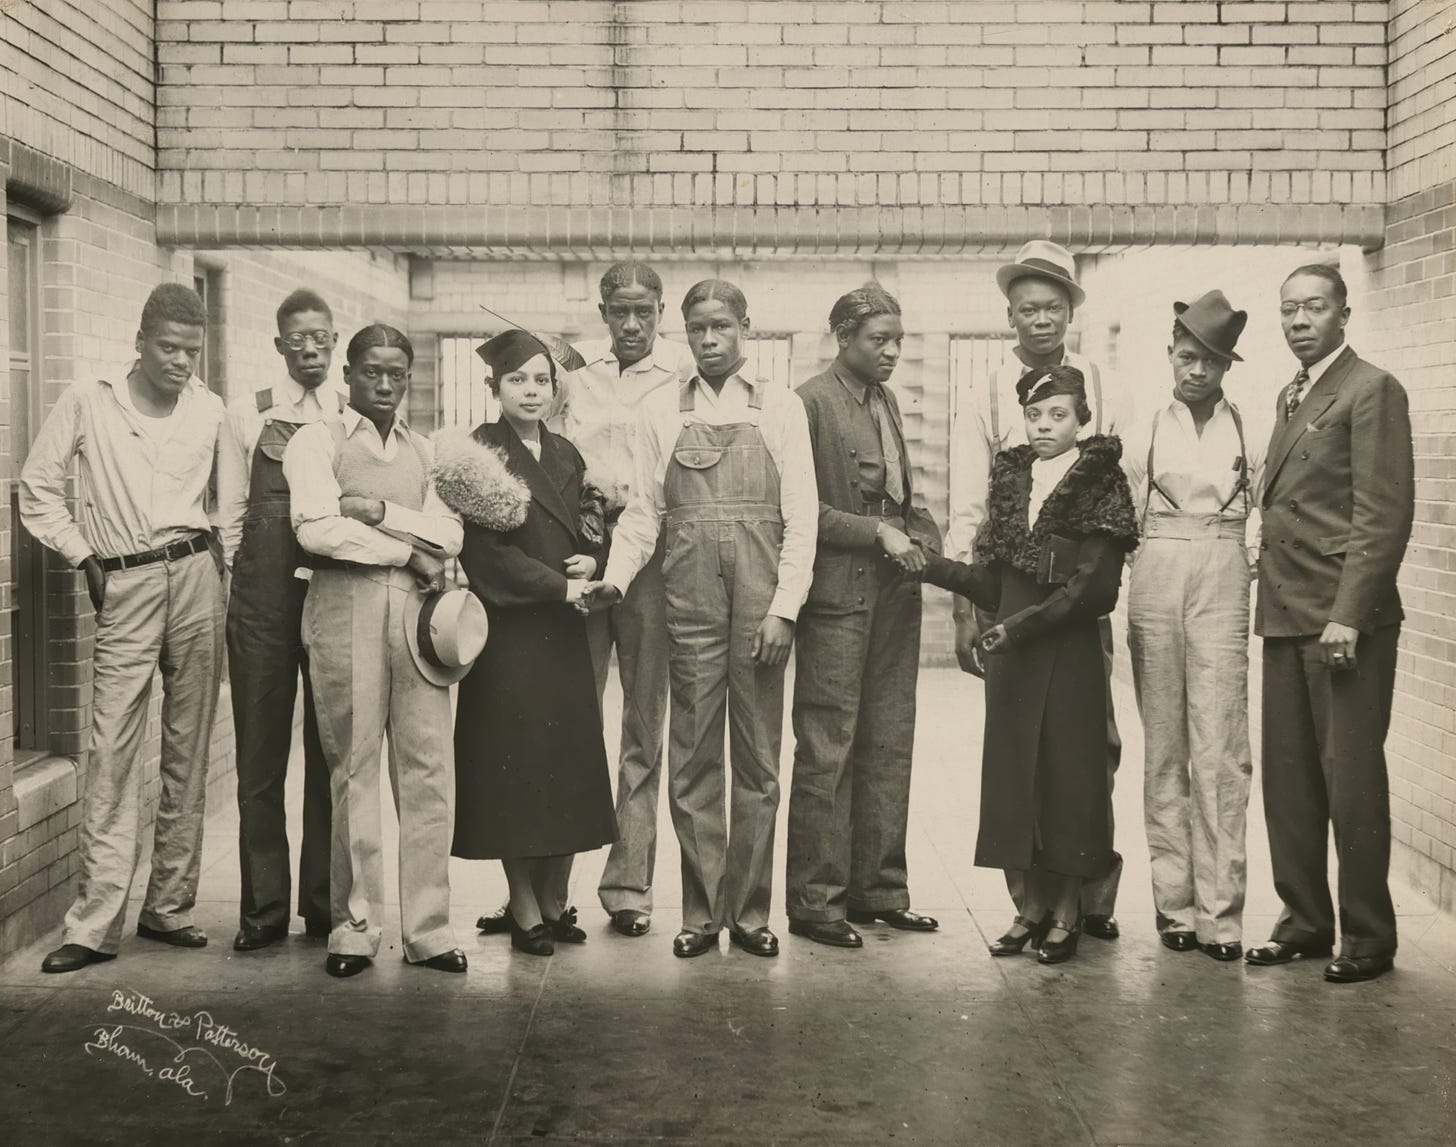 A photograph of young Black women activists Juanita Jackson Mitchell and Laura Kellum standing alongside the wrongly incarcerated Scottsboro Boys, a group of African American men. Mitchell and Kellum are dressed in formal attire, while the men are wearing working clothes.